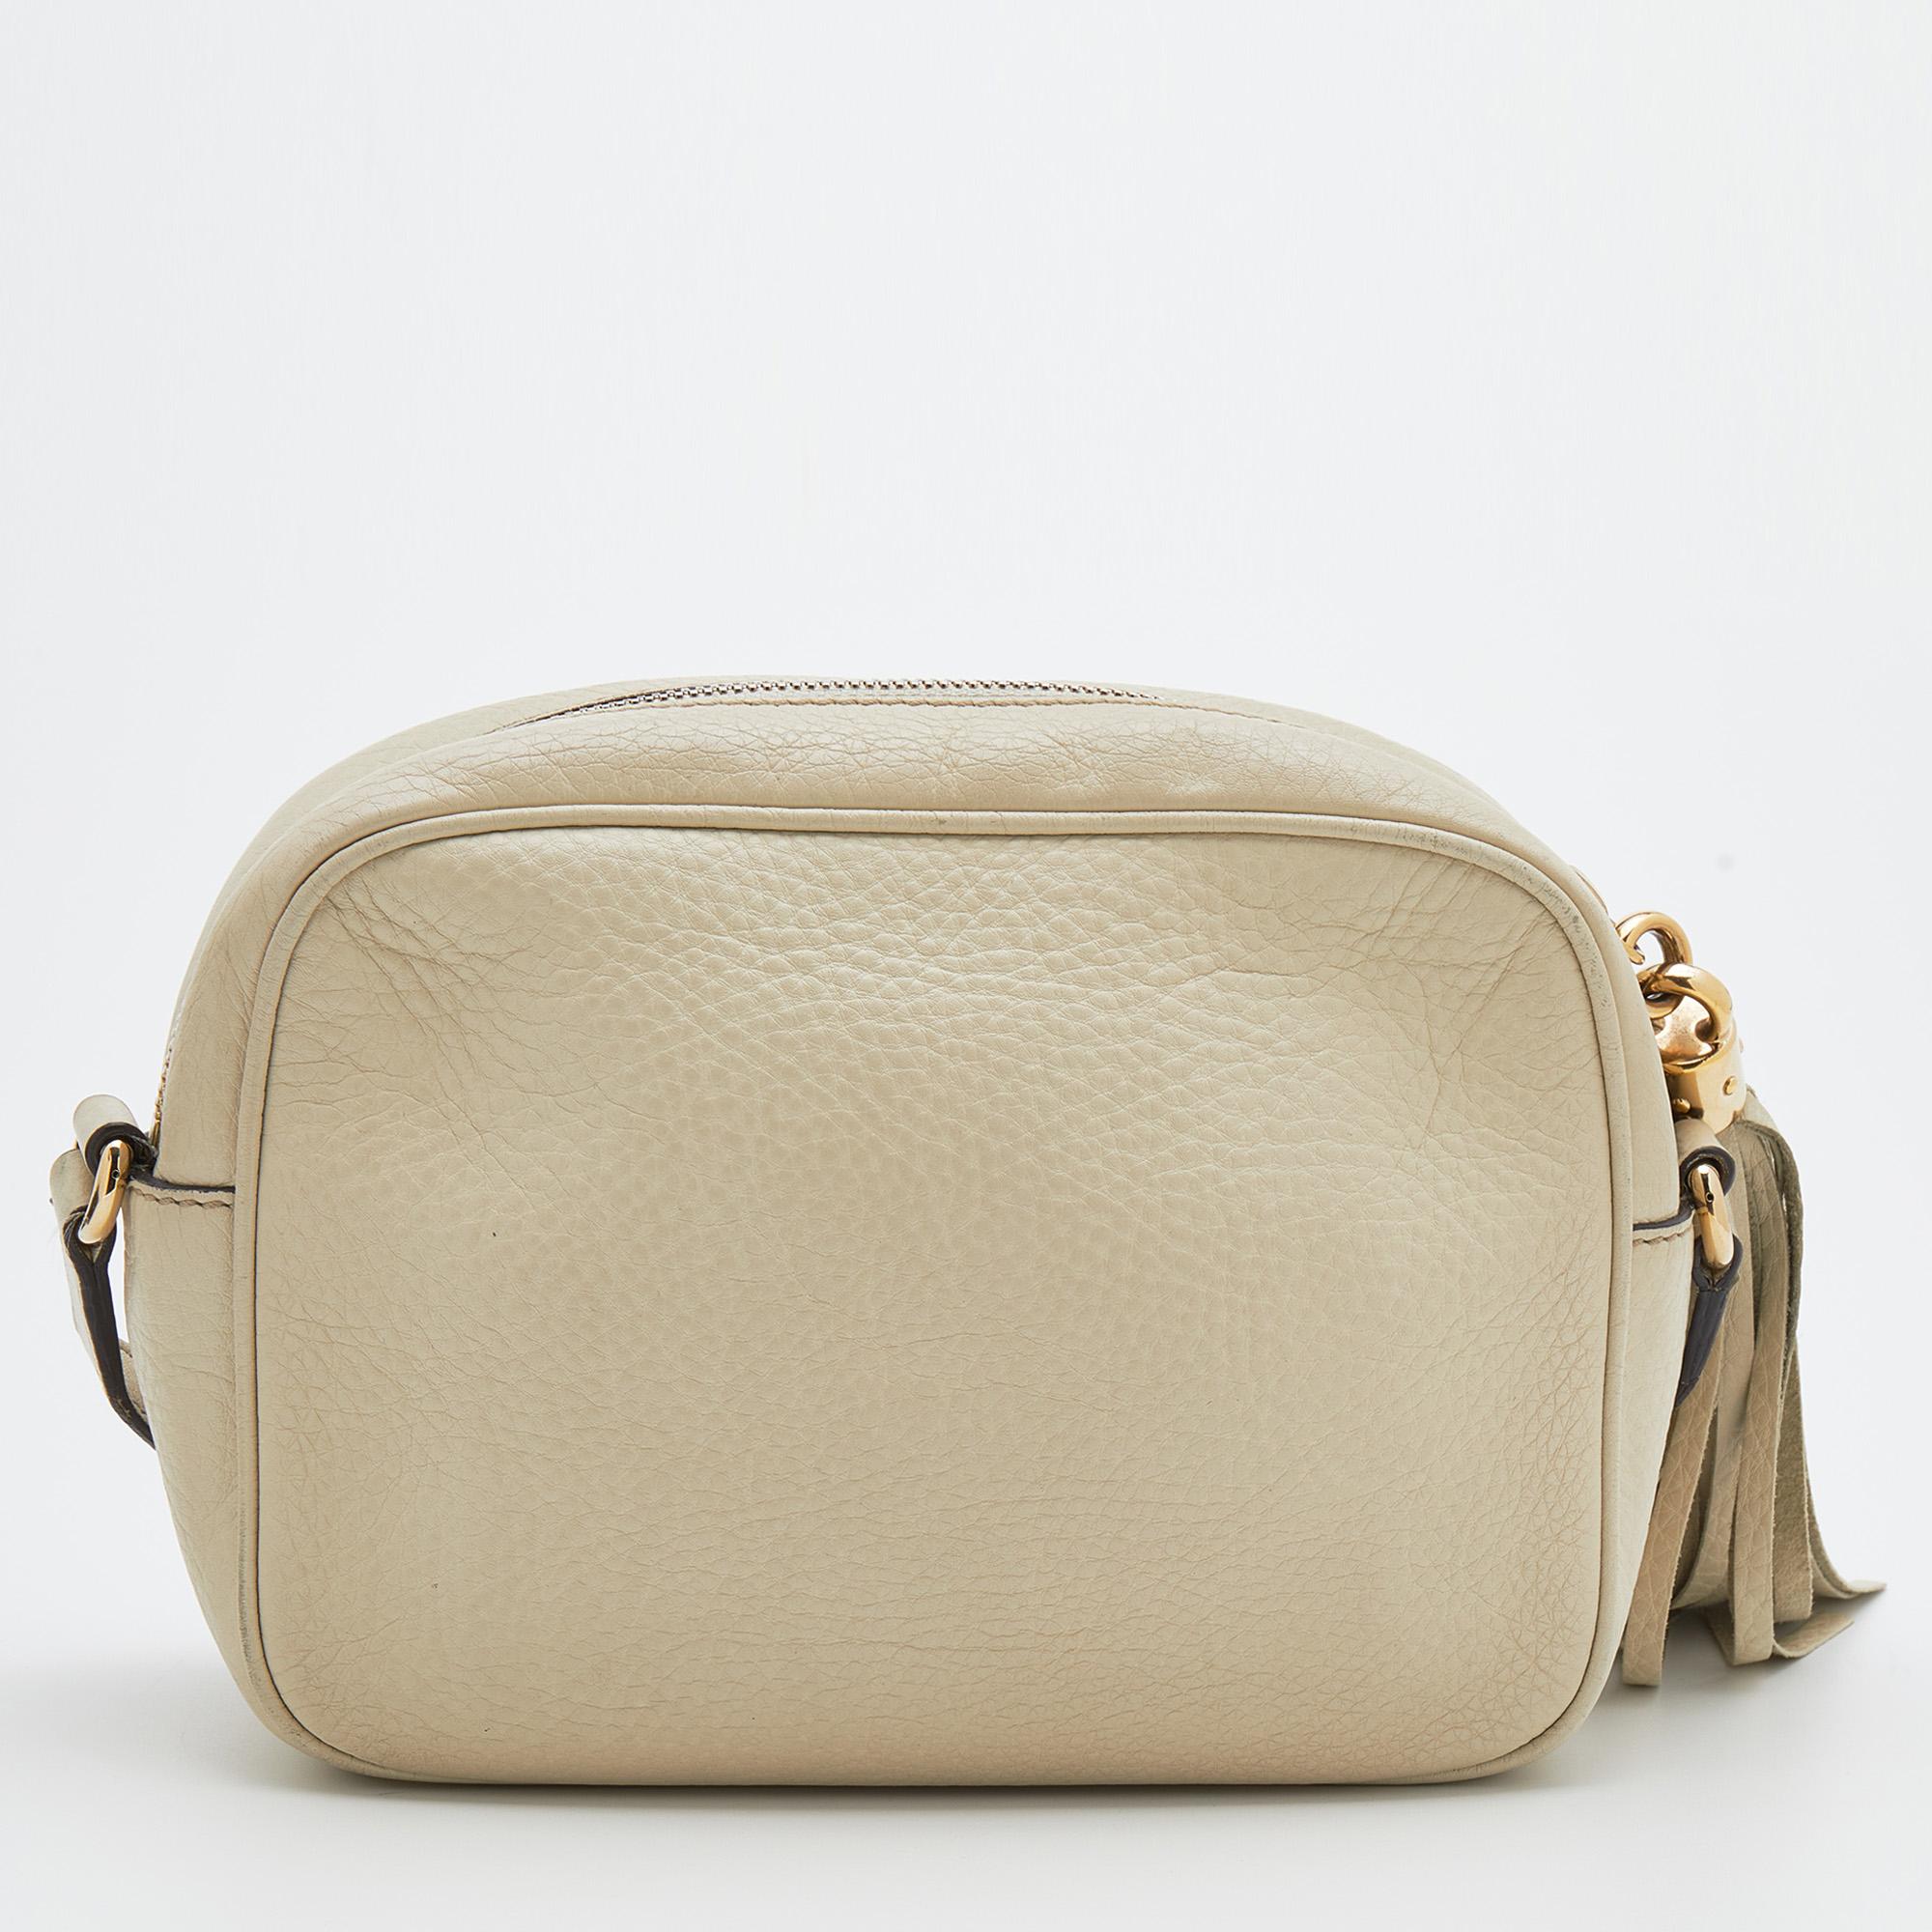 Gucci's expertise in creating noteworthy designs is evident in this Soho bag. Made from cream leather, it gets a luxe update with a brand motif on the front and displays a shoulder strap. The zipper closure at the top is equipped with a